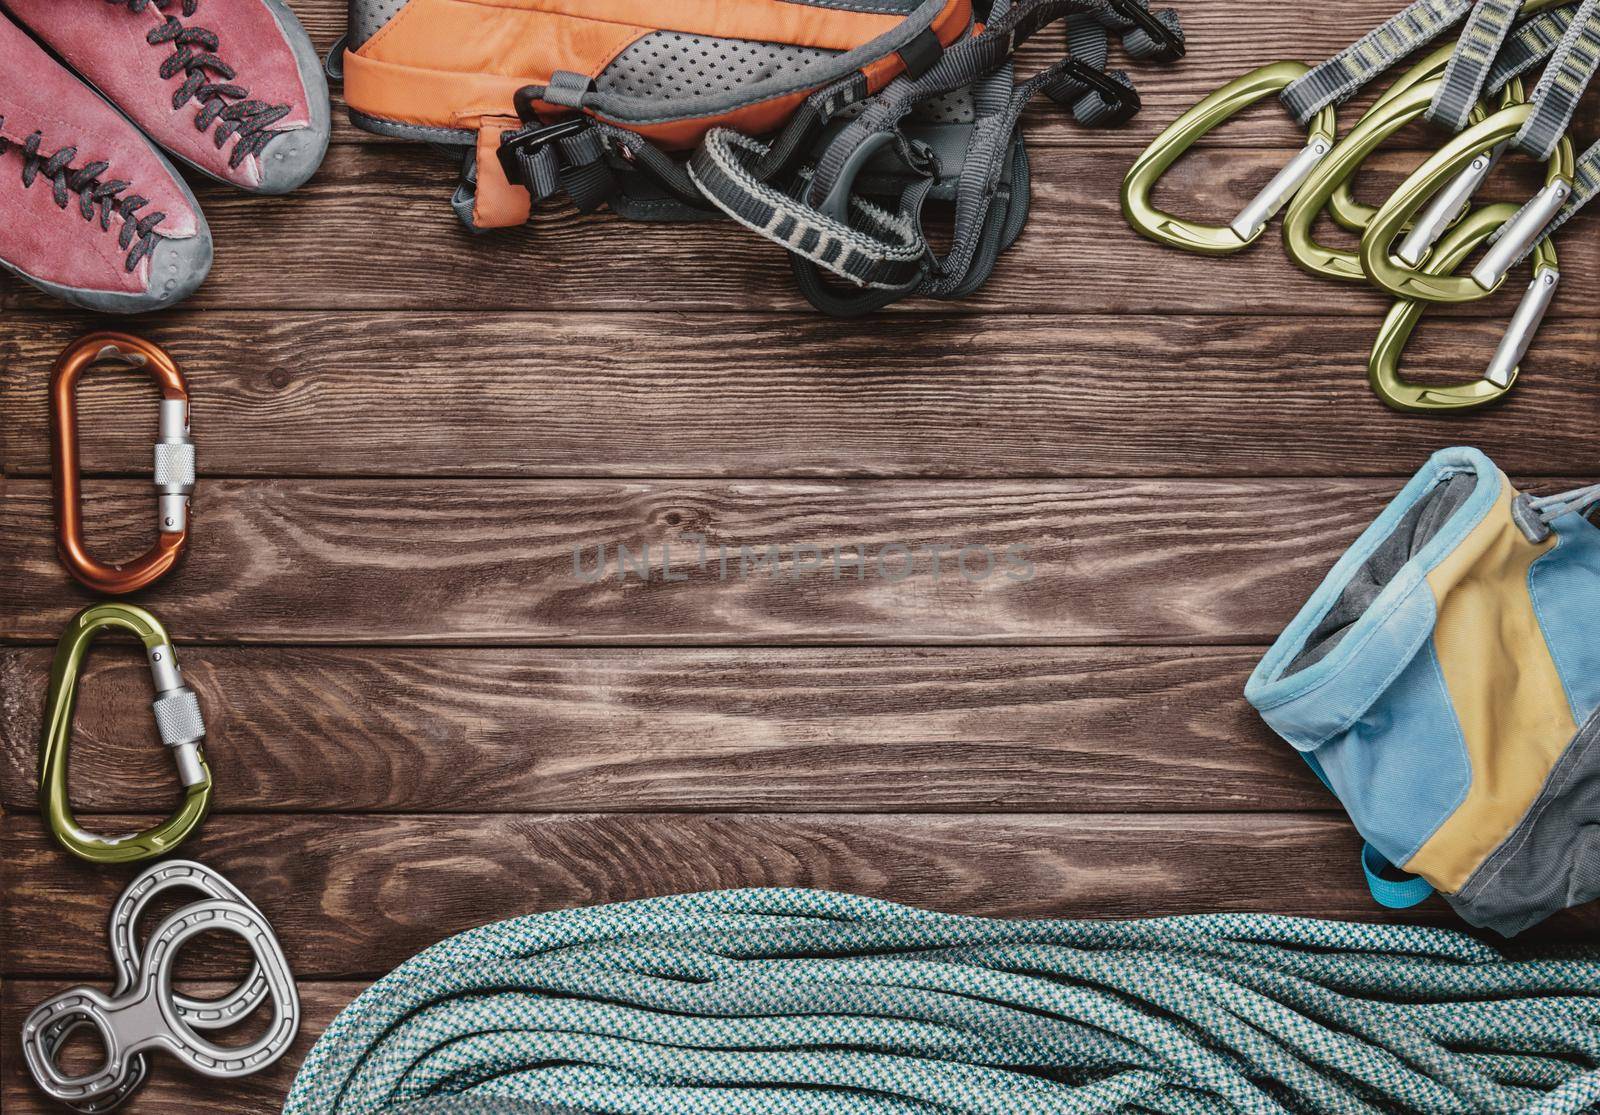 Climbing equipment on wooden background, top view. Space for text in center part of image.